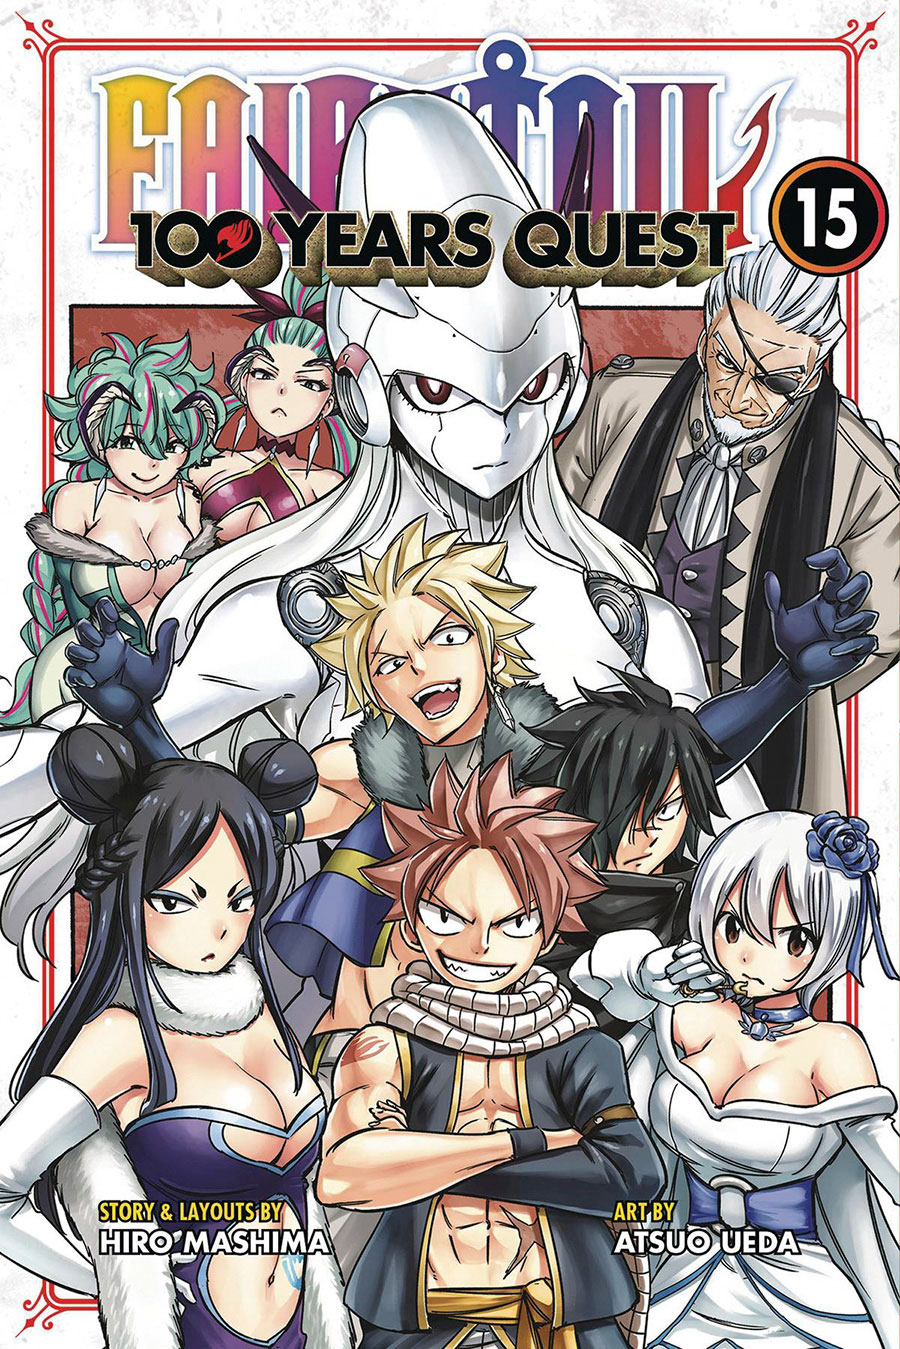 Fairy Tail 100 Years Quest Vol 15 GN